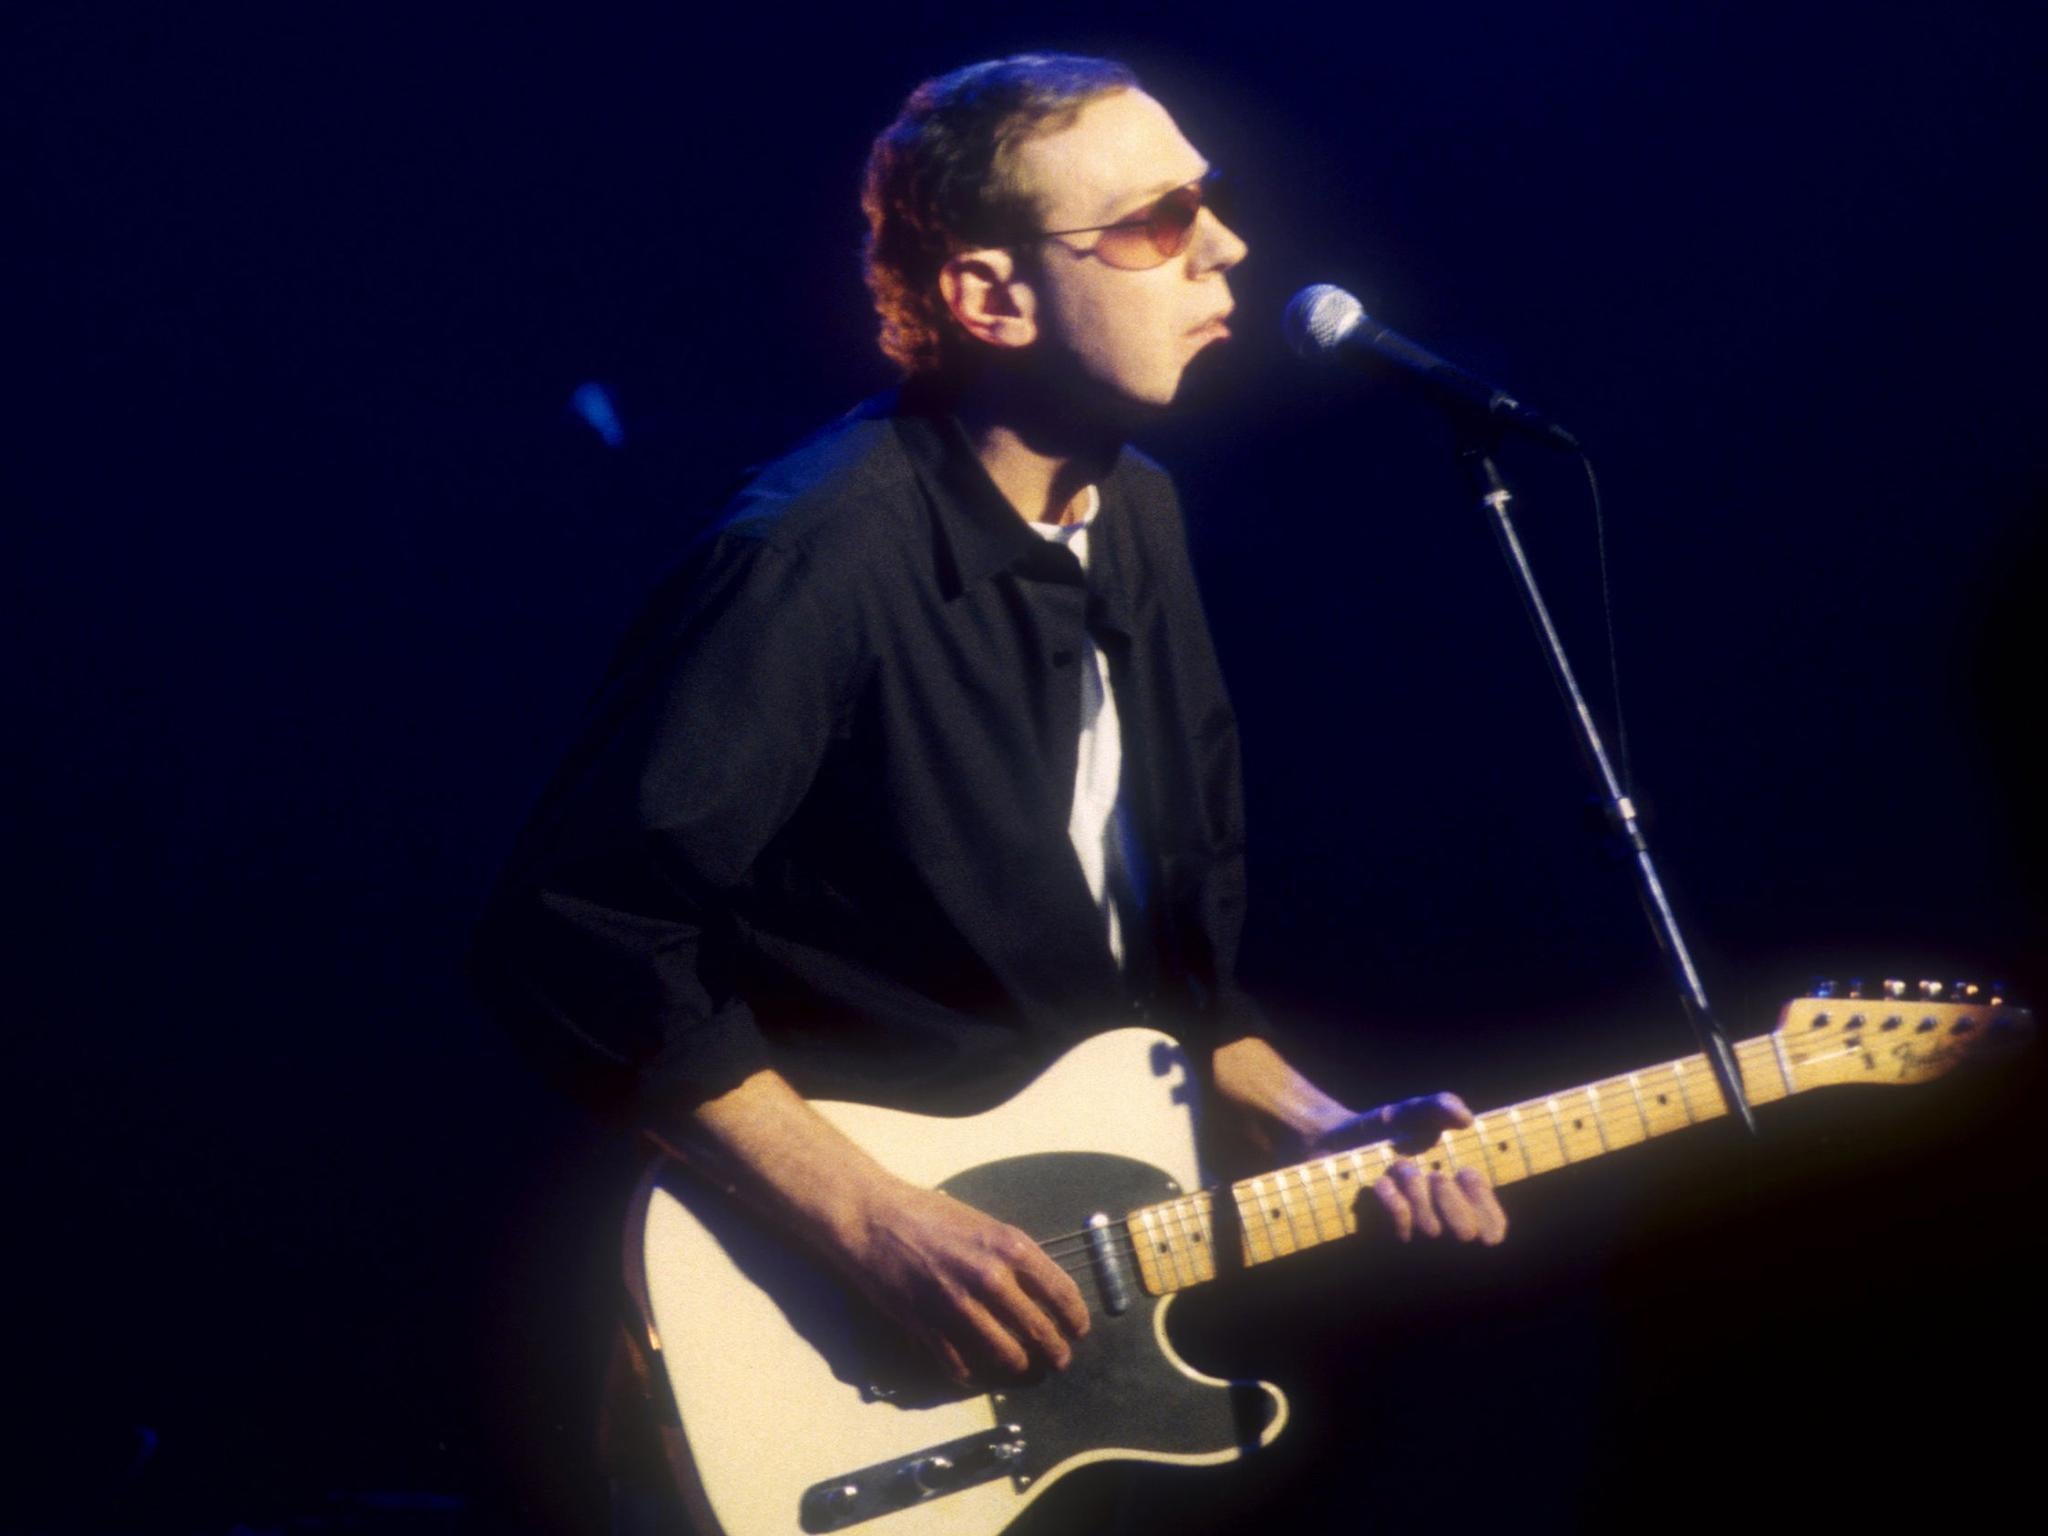 Walker performing on the BBC's ‘Later with Jools Holland’ in May 1997